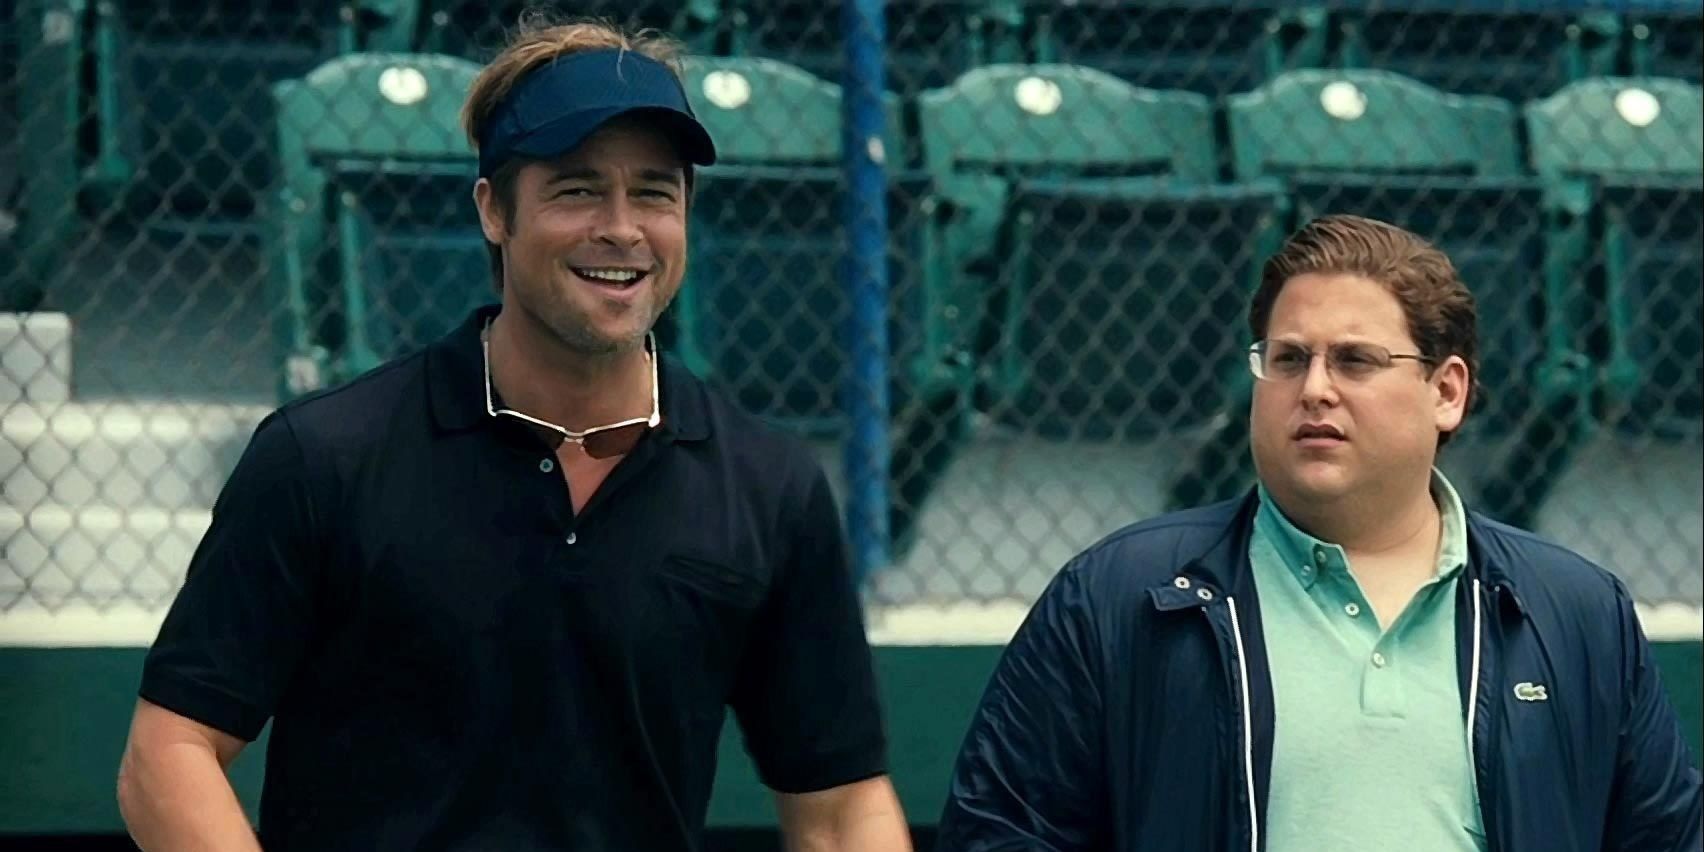 Brad Pitt as Billy Beane scouting his team in Moneyball.